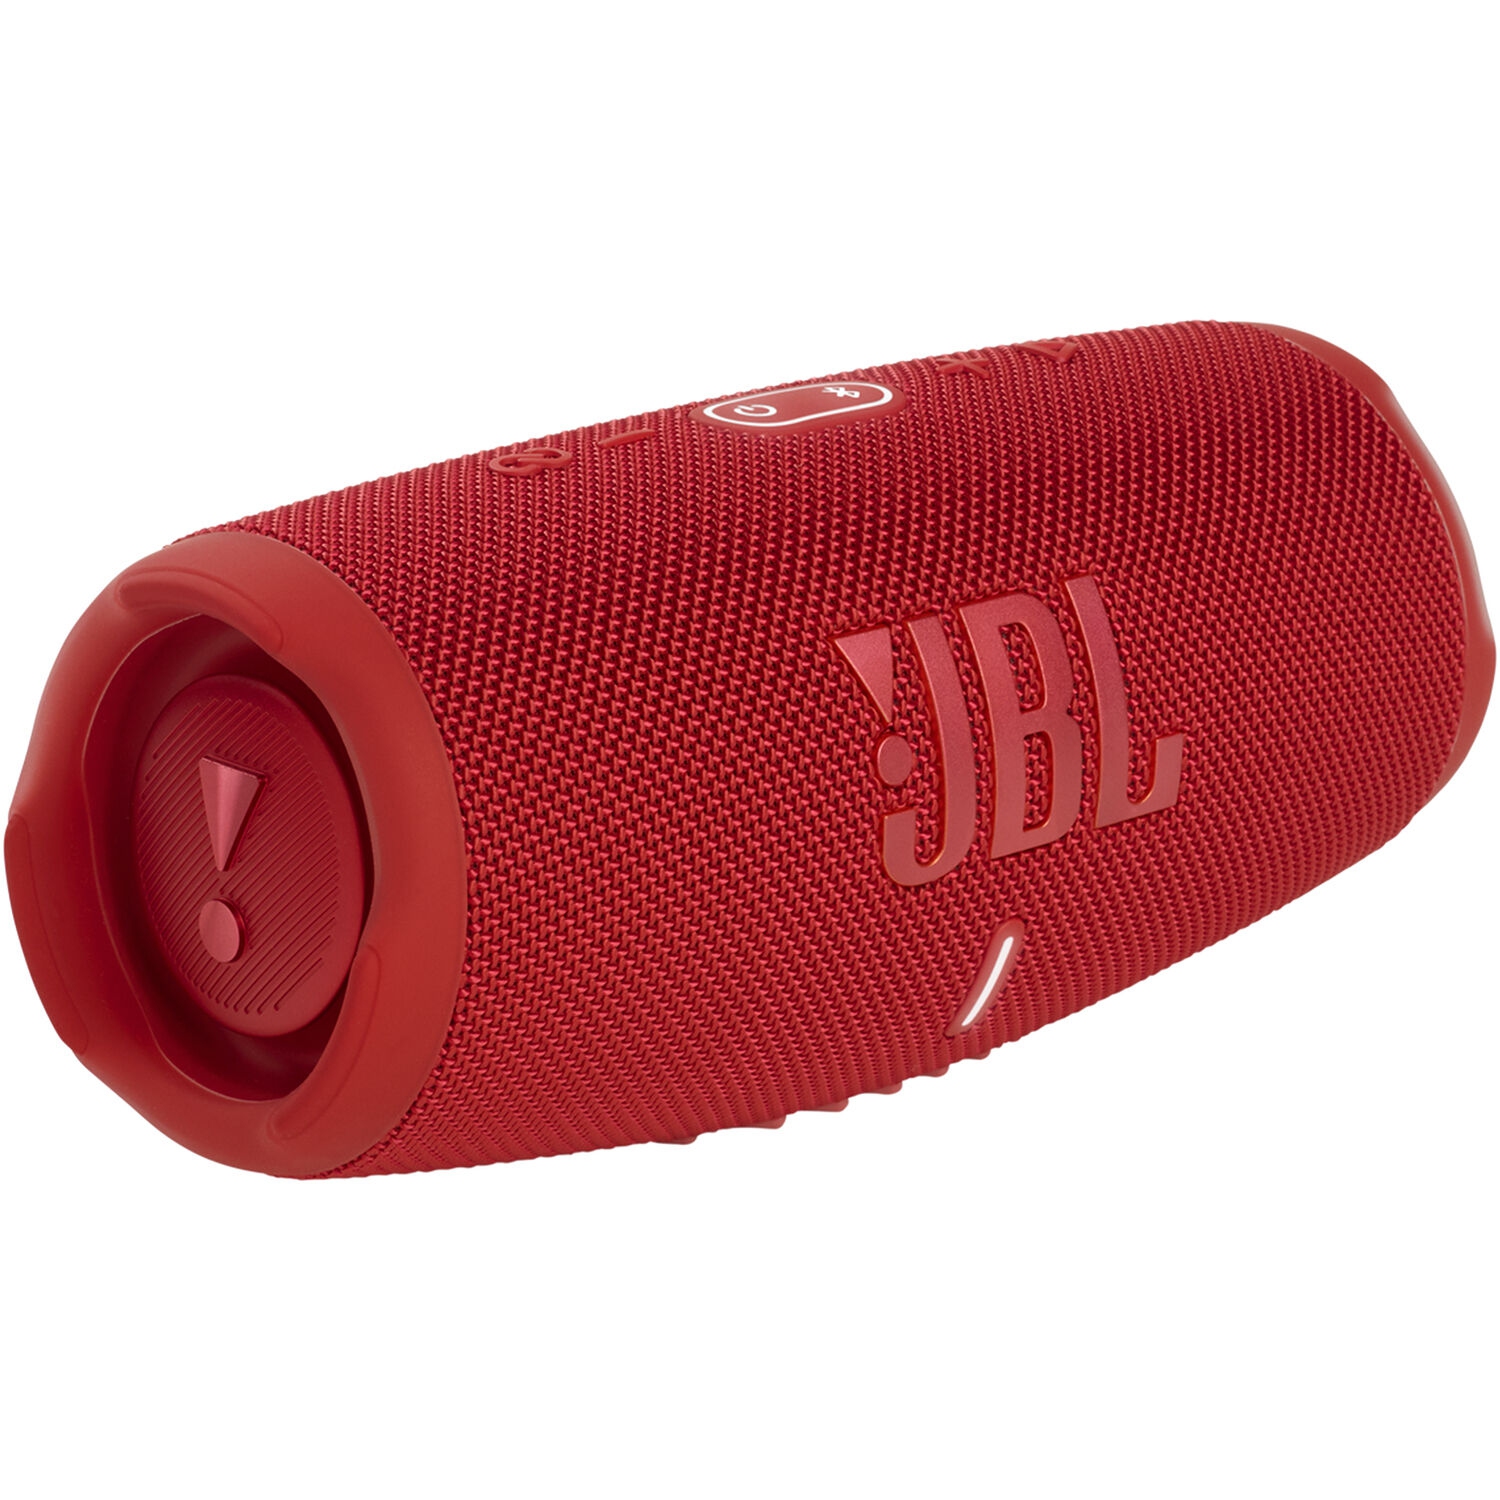 Refurbished (Excellent) - JBL Charge 5 Portable Bluetooth Speaker with Deep Bass, IP67 Waterproof and Dustproof, Up To 20 Hours of Playtime, Built-in Powerbank - Red